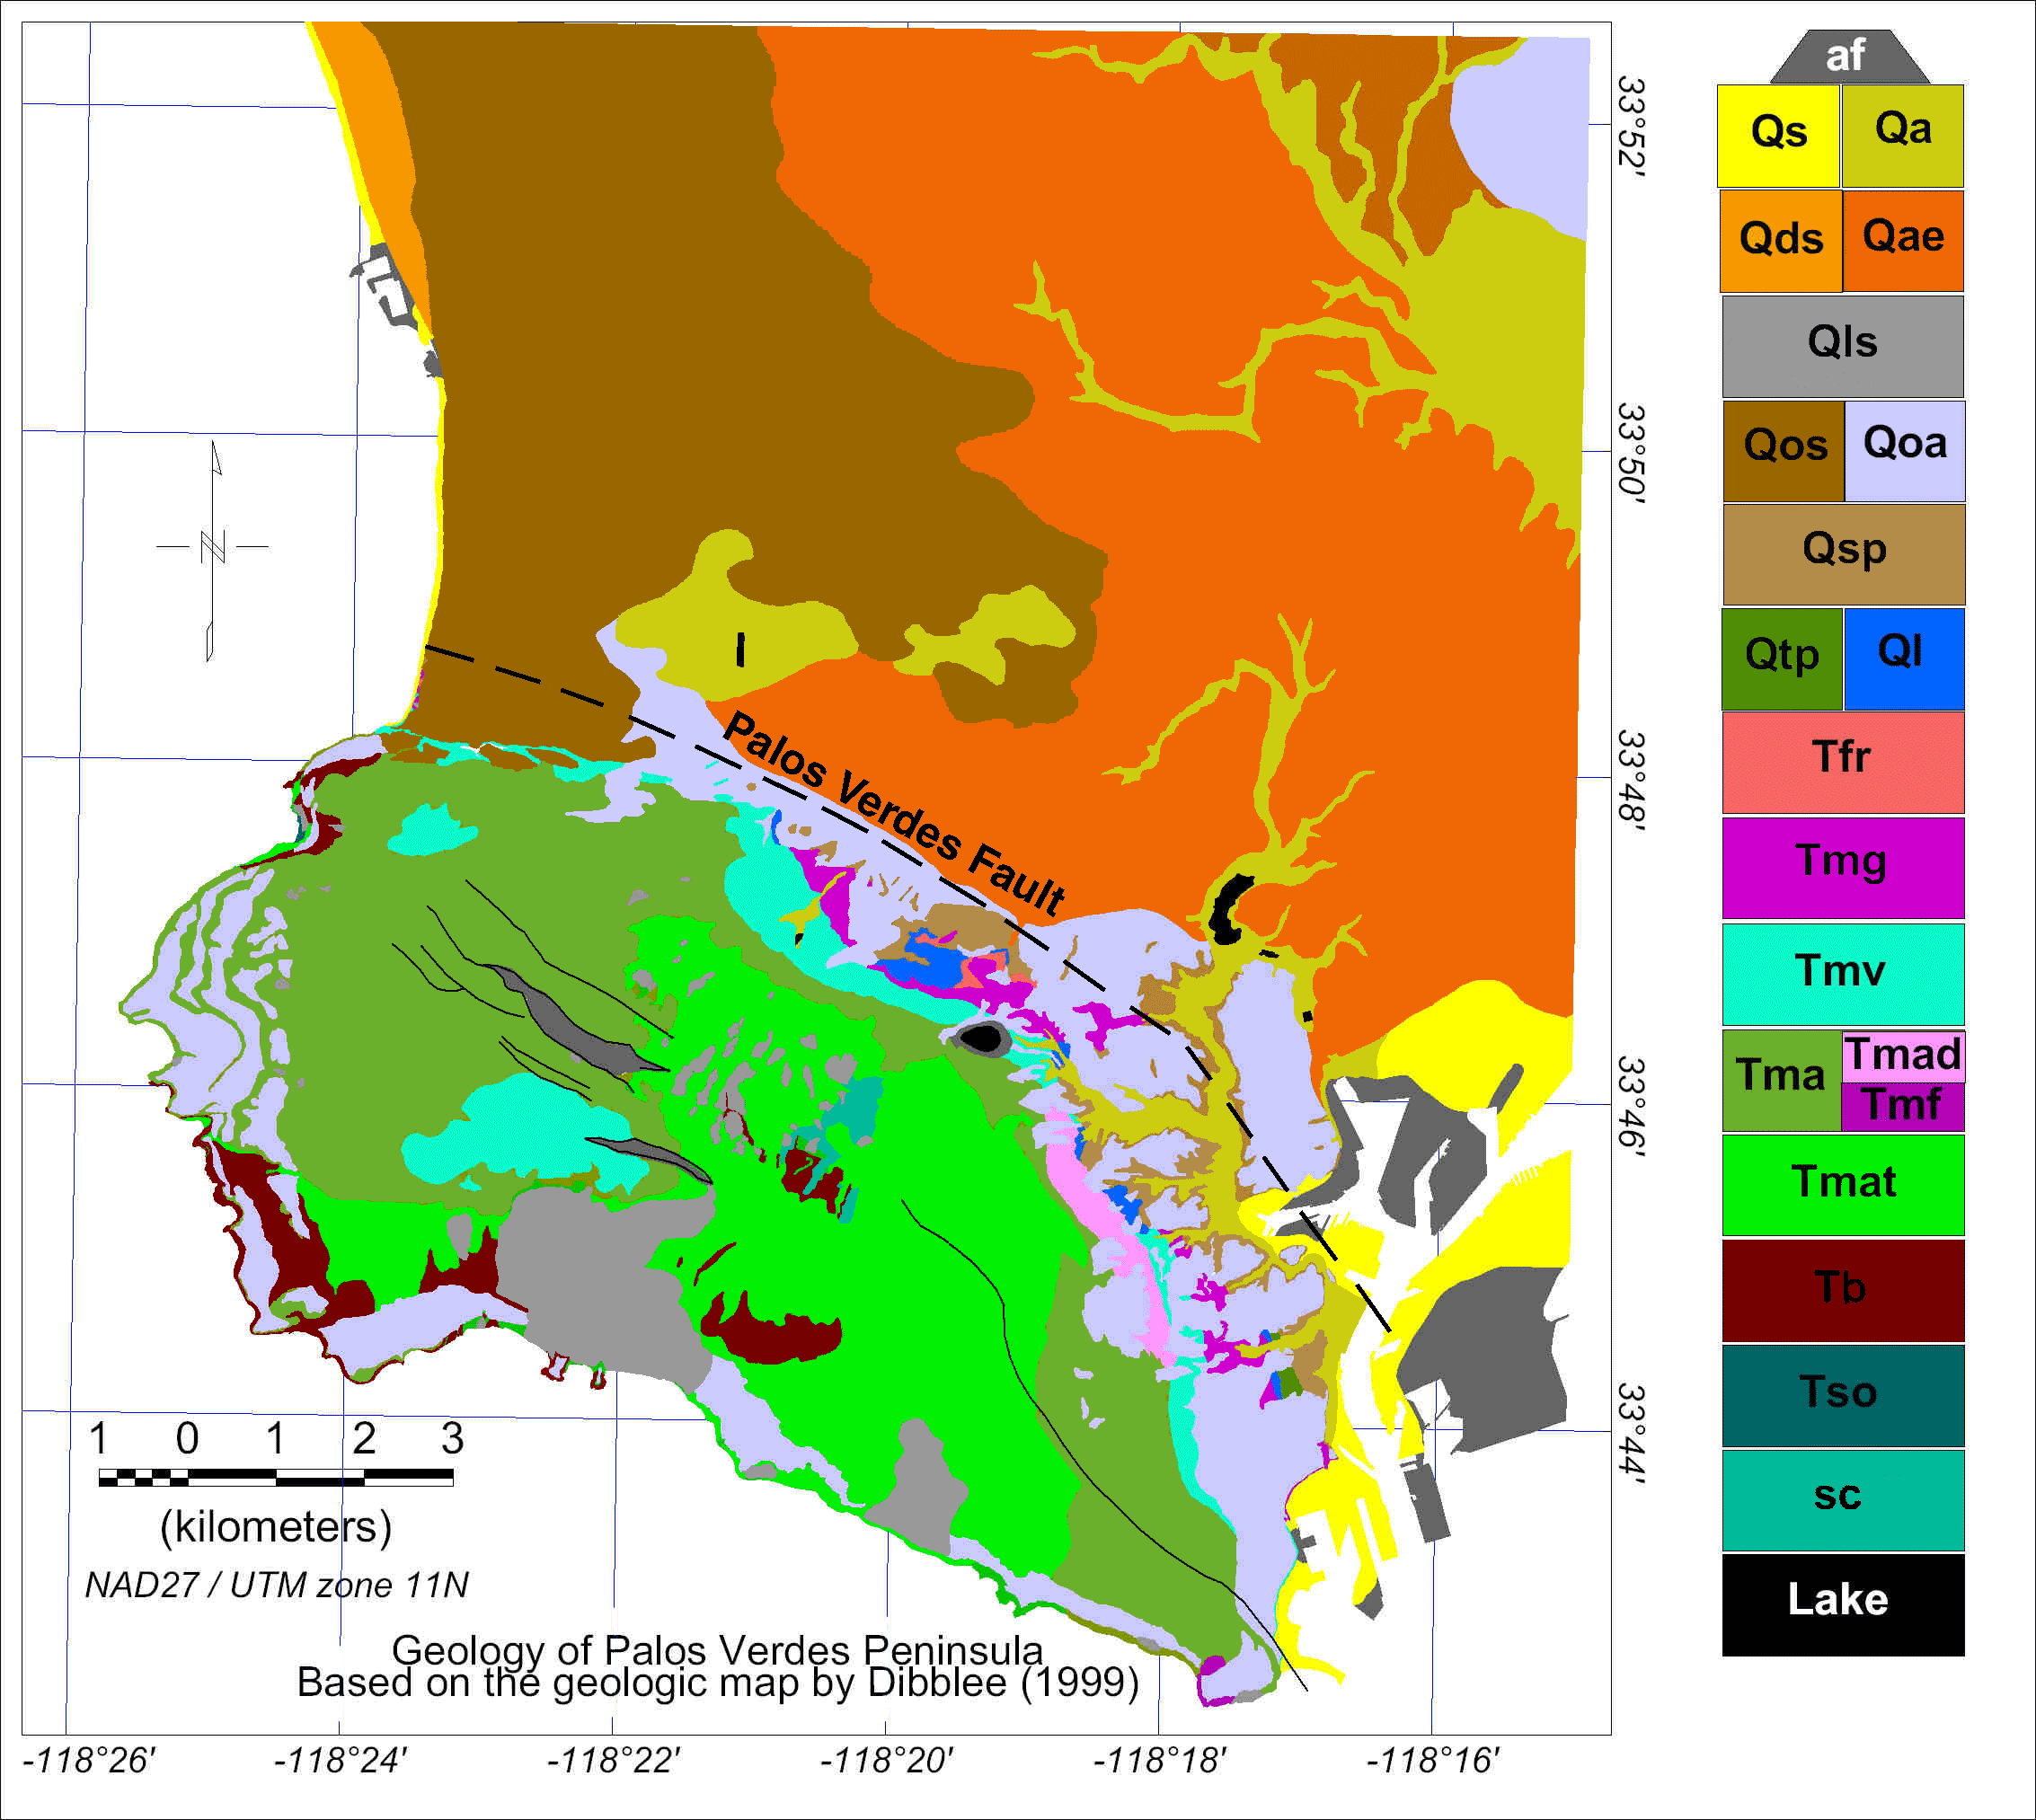 Image of geology based on map by Dibblee (1999)